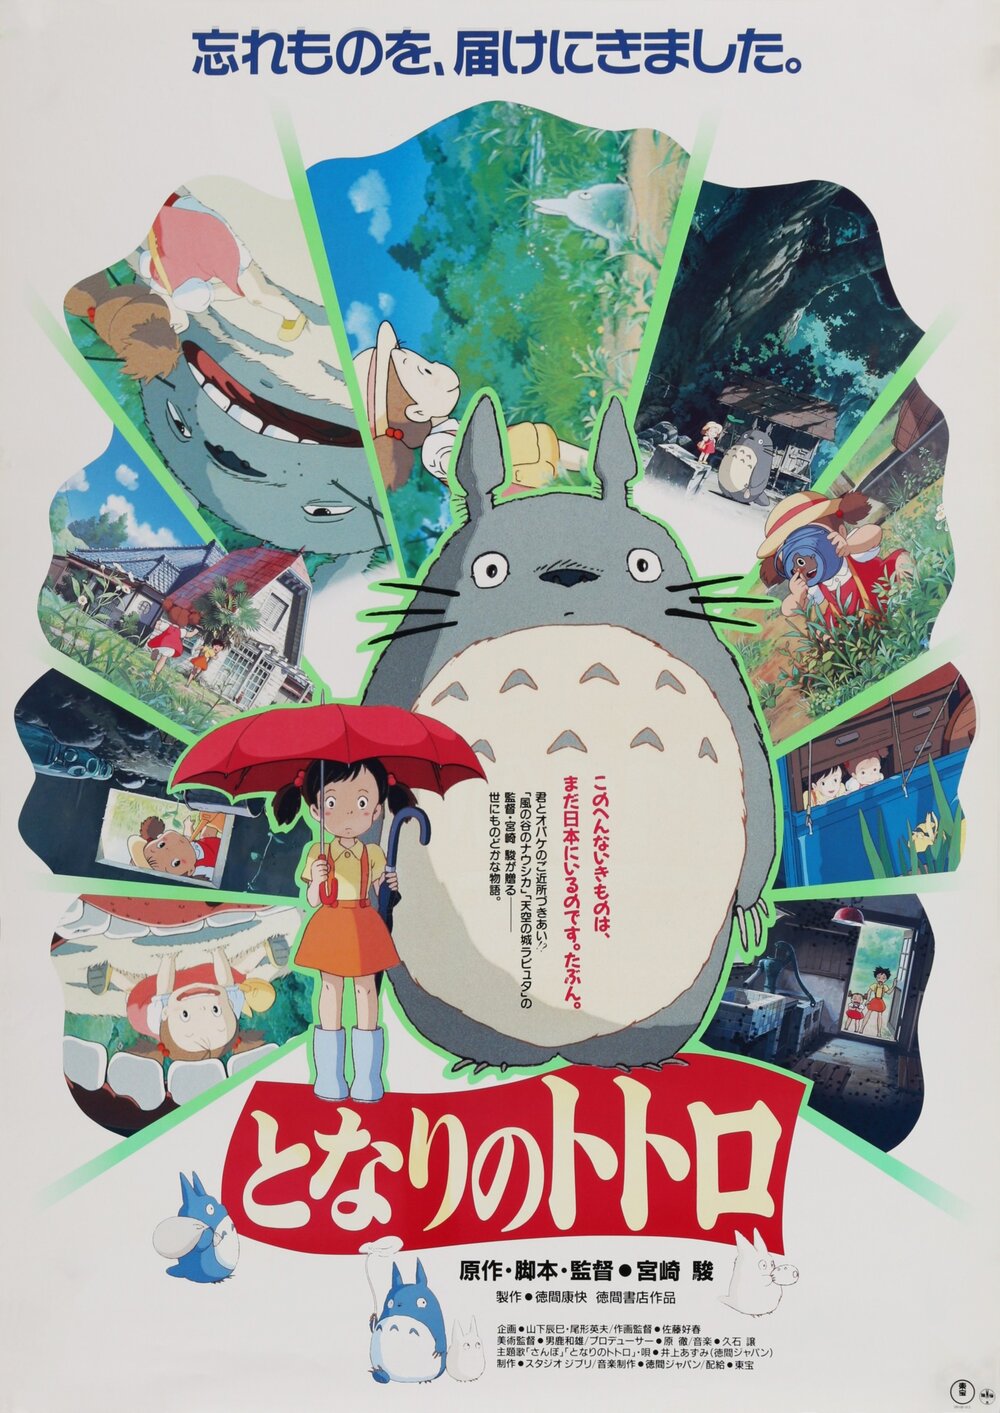   My Neighbour Totoro ( 1988), Japanese Movie Poster Source:  Rock Paper Film  